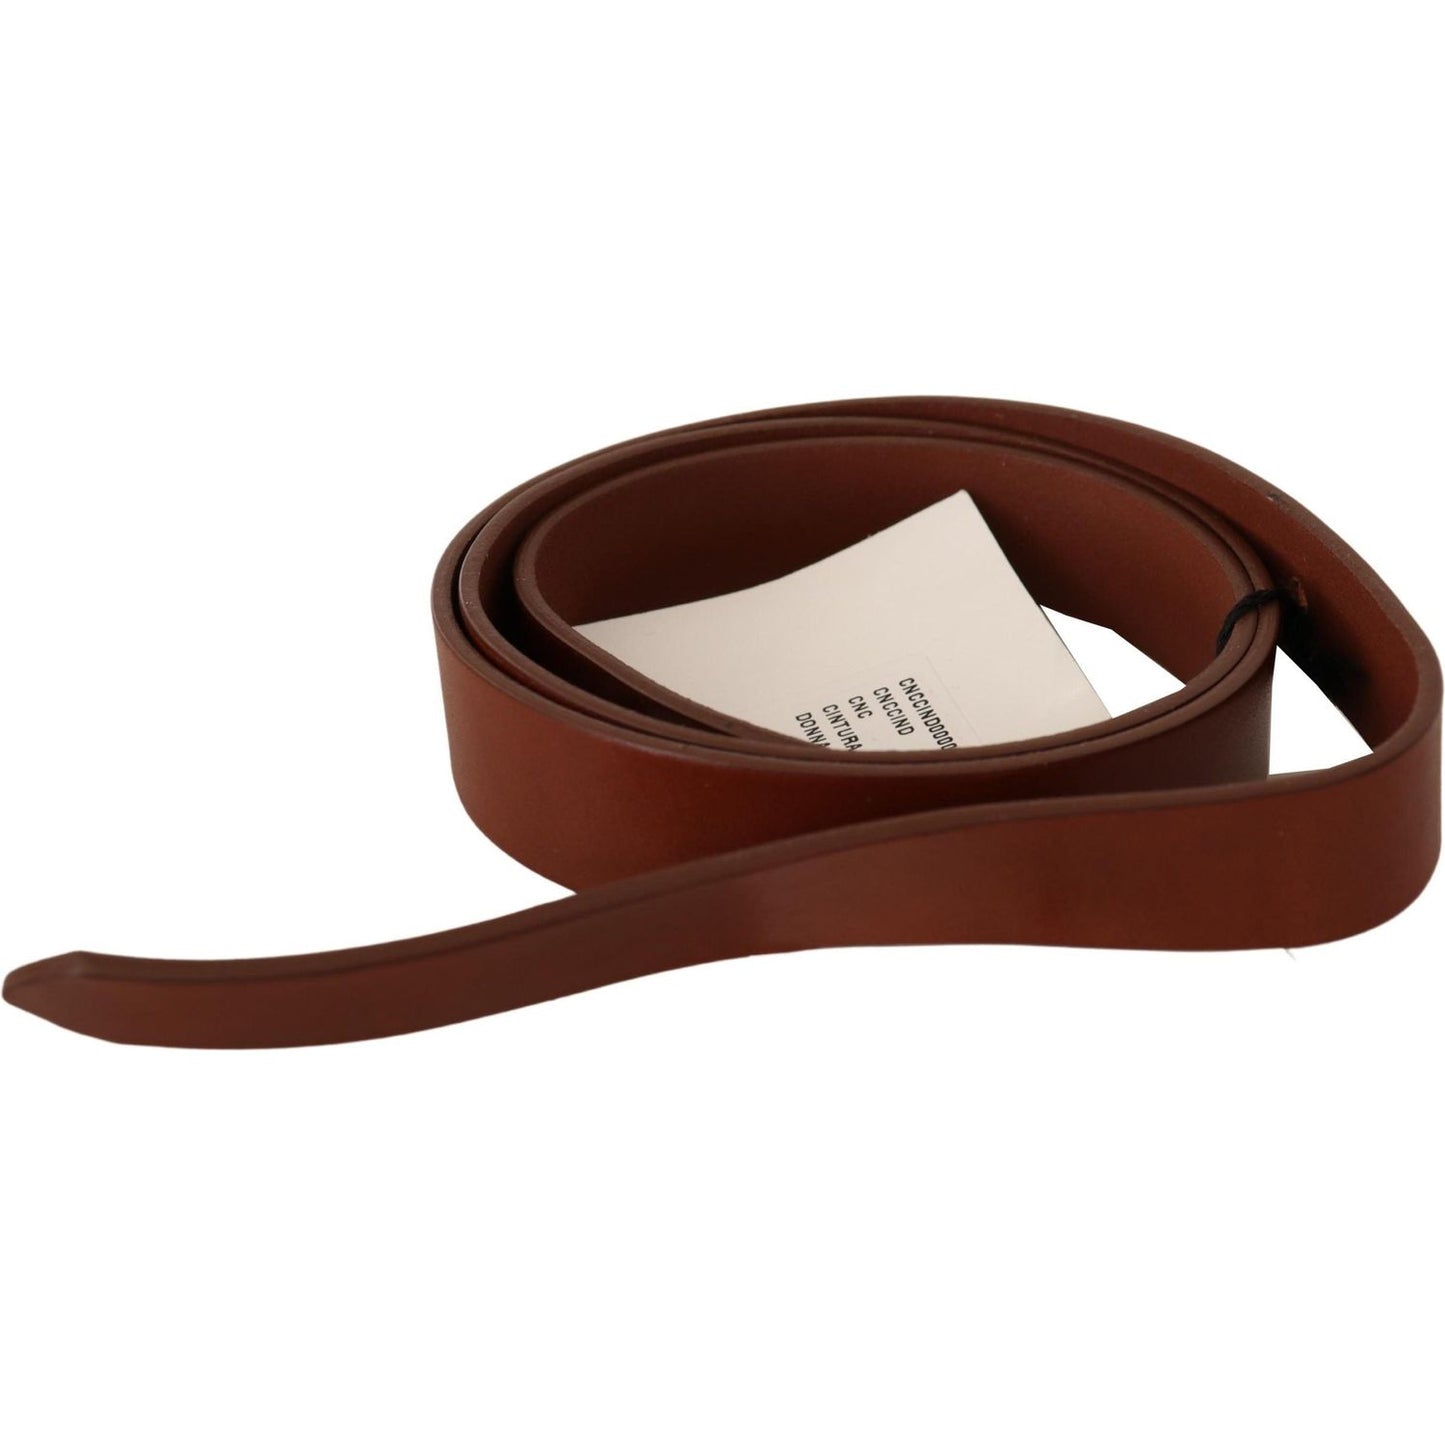 Costume National Elegant Brown Leather Fashion Belt brown-leather-silver-fastening-belt WOMAN BELTS IMG_7147-scaled-0ade469d-a72.jpg